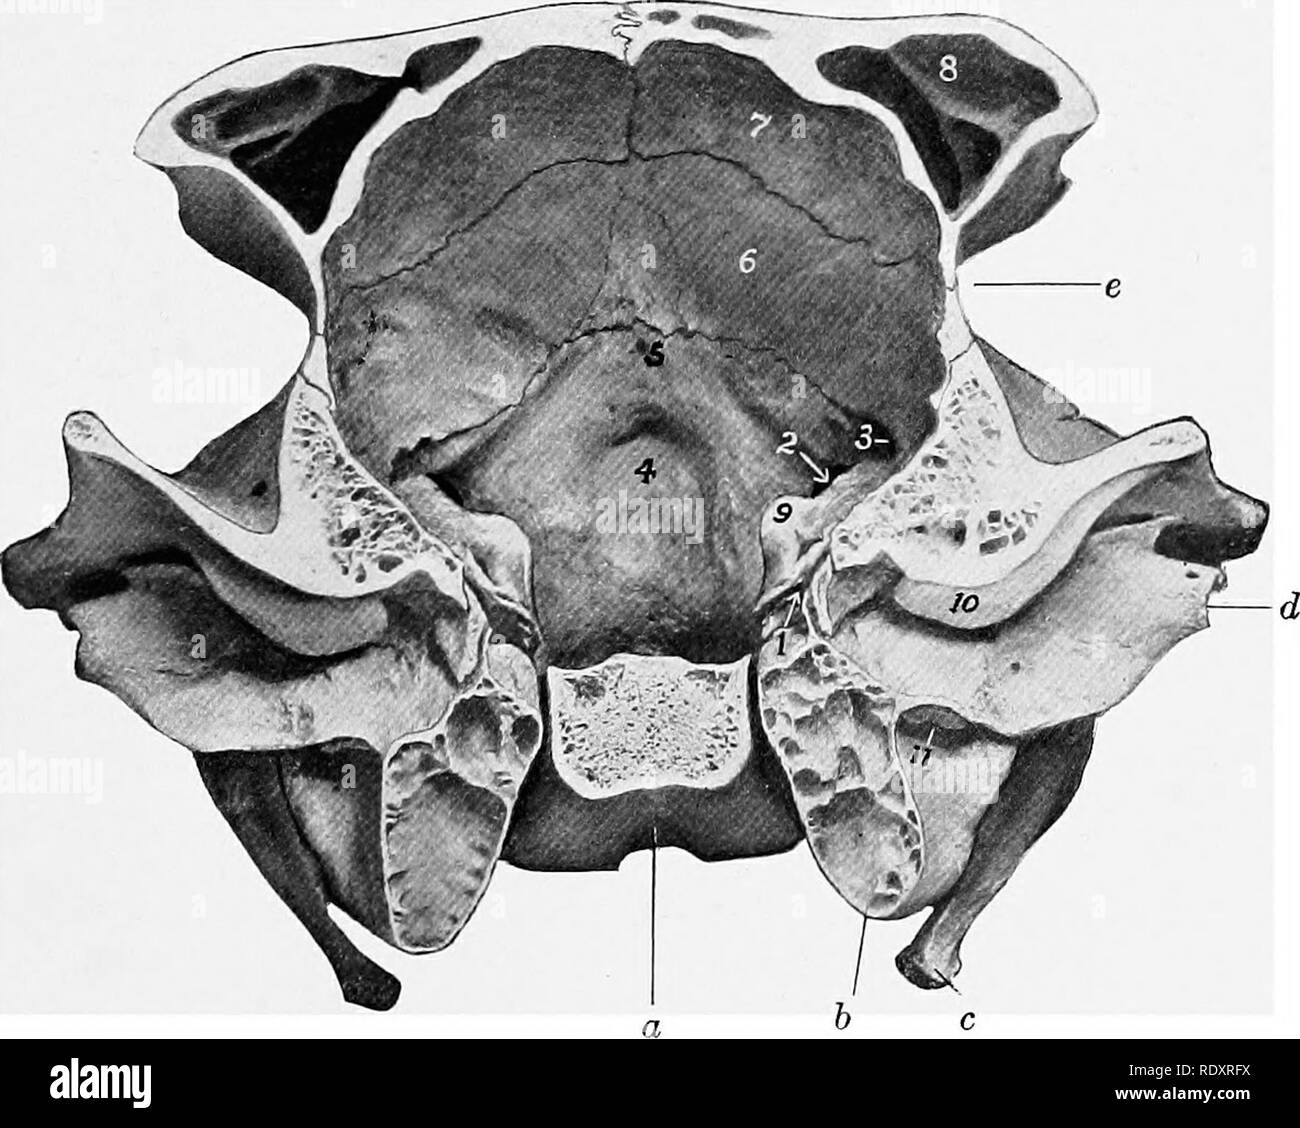 . The anatomy of the domestic animals . Veterinary anatomy. Fig. 130.—Choss-section of Cranium of Ox. The section cuts the posterior part of the temporal condyle and is viewed from behind, a, Body of sphenoid; b, bulla ossea;- c, temporal condyle; 1, dorsum sellae; 2, foramen ovale; 3, hypophyseal or pituitary fossa; 4, foramen orbito-rotundum; 5. optic foramina; 6, crista galli; 7, cribriform plate of ethmoid; 8, orbital wing of sphenoid; 9, temporal wing of sphenoid; 10, internal plate of frontal bone; 11, frontal sinus; 12, temporal process of malar bone.'. Fig. 131.—Cross-section of Craniu Stock Photo